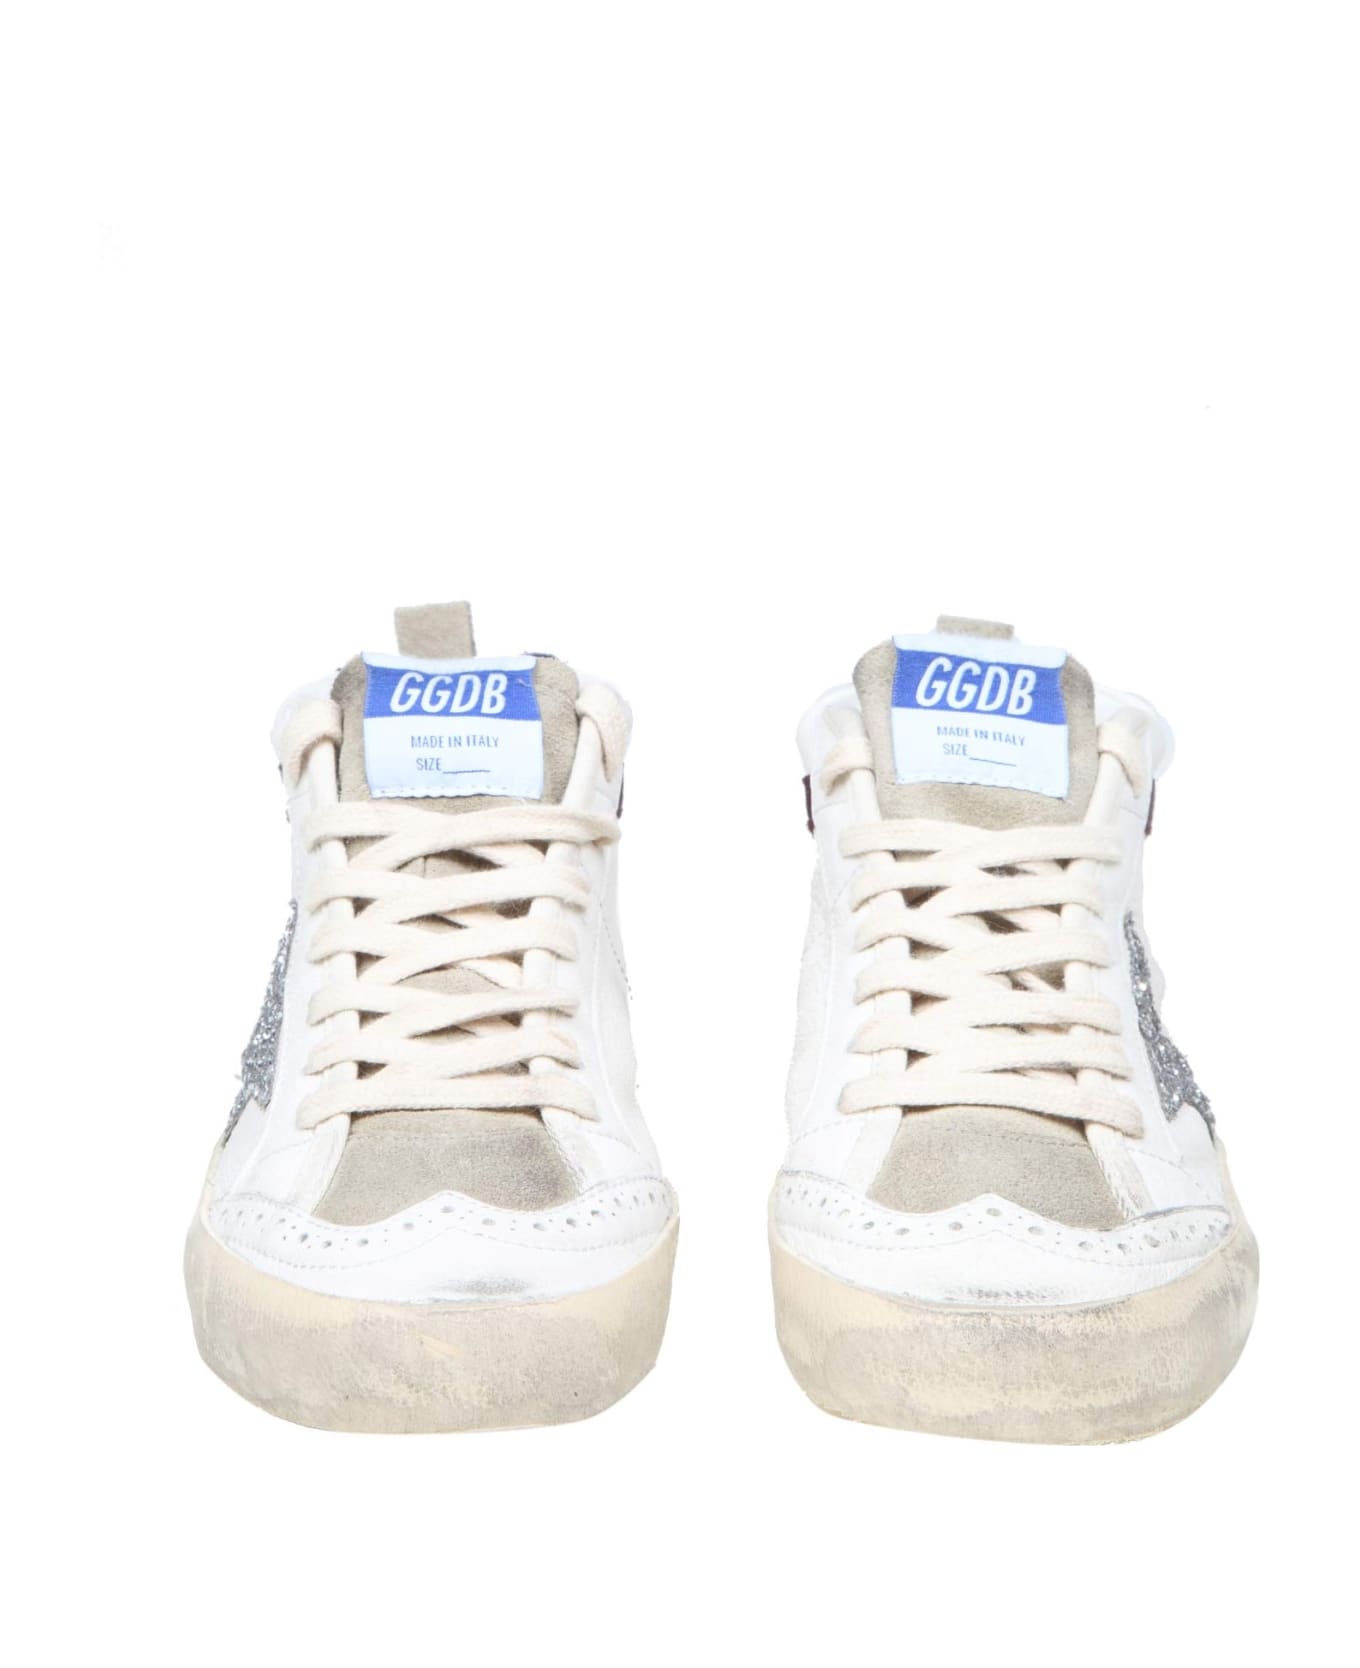 Golden Goose Mid Star Sneakers In White Leather - Bianco